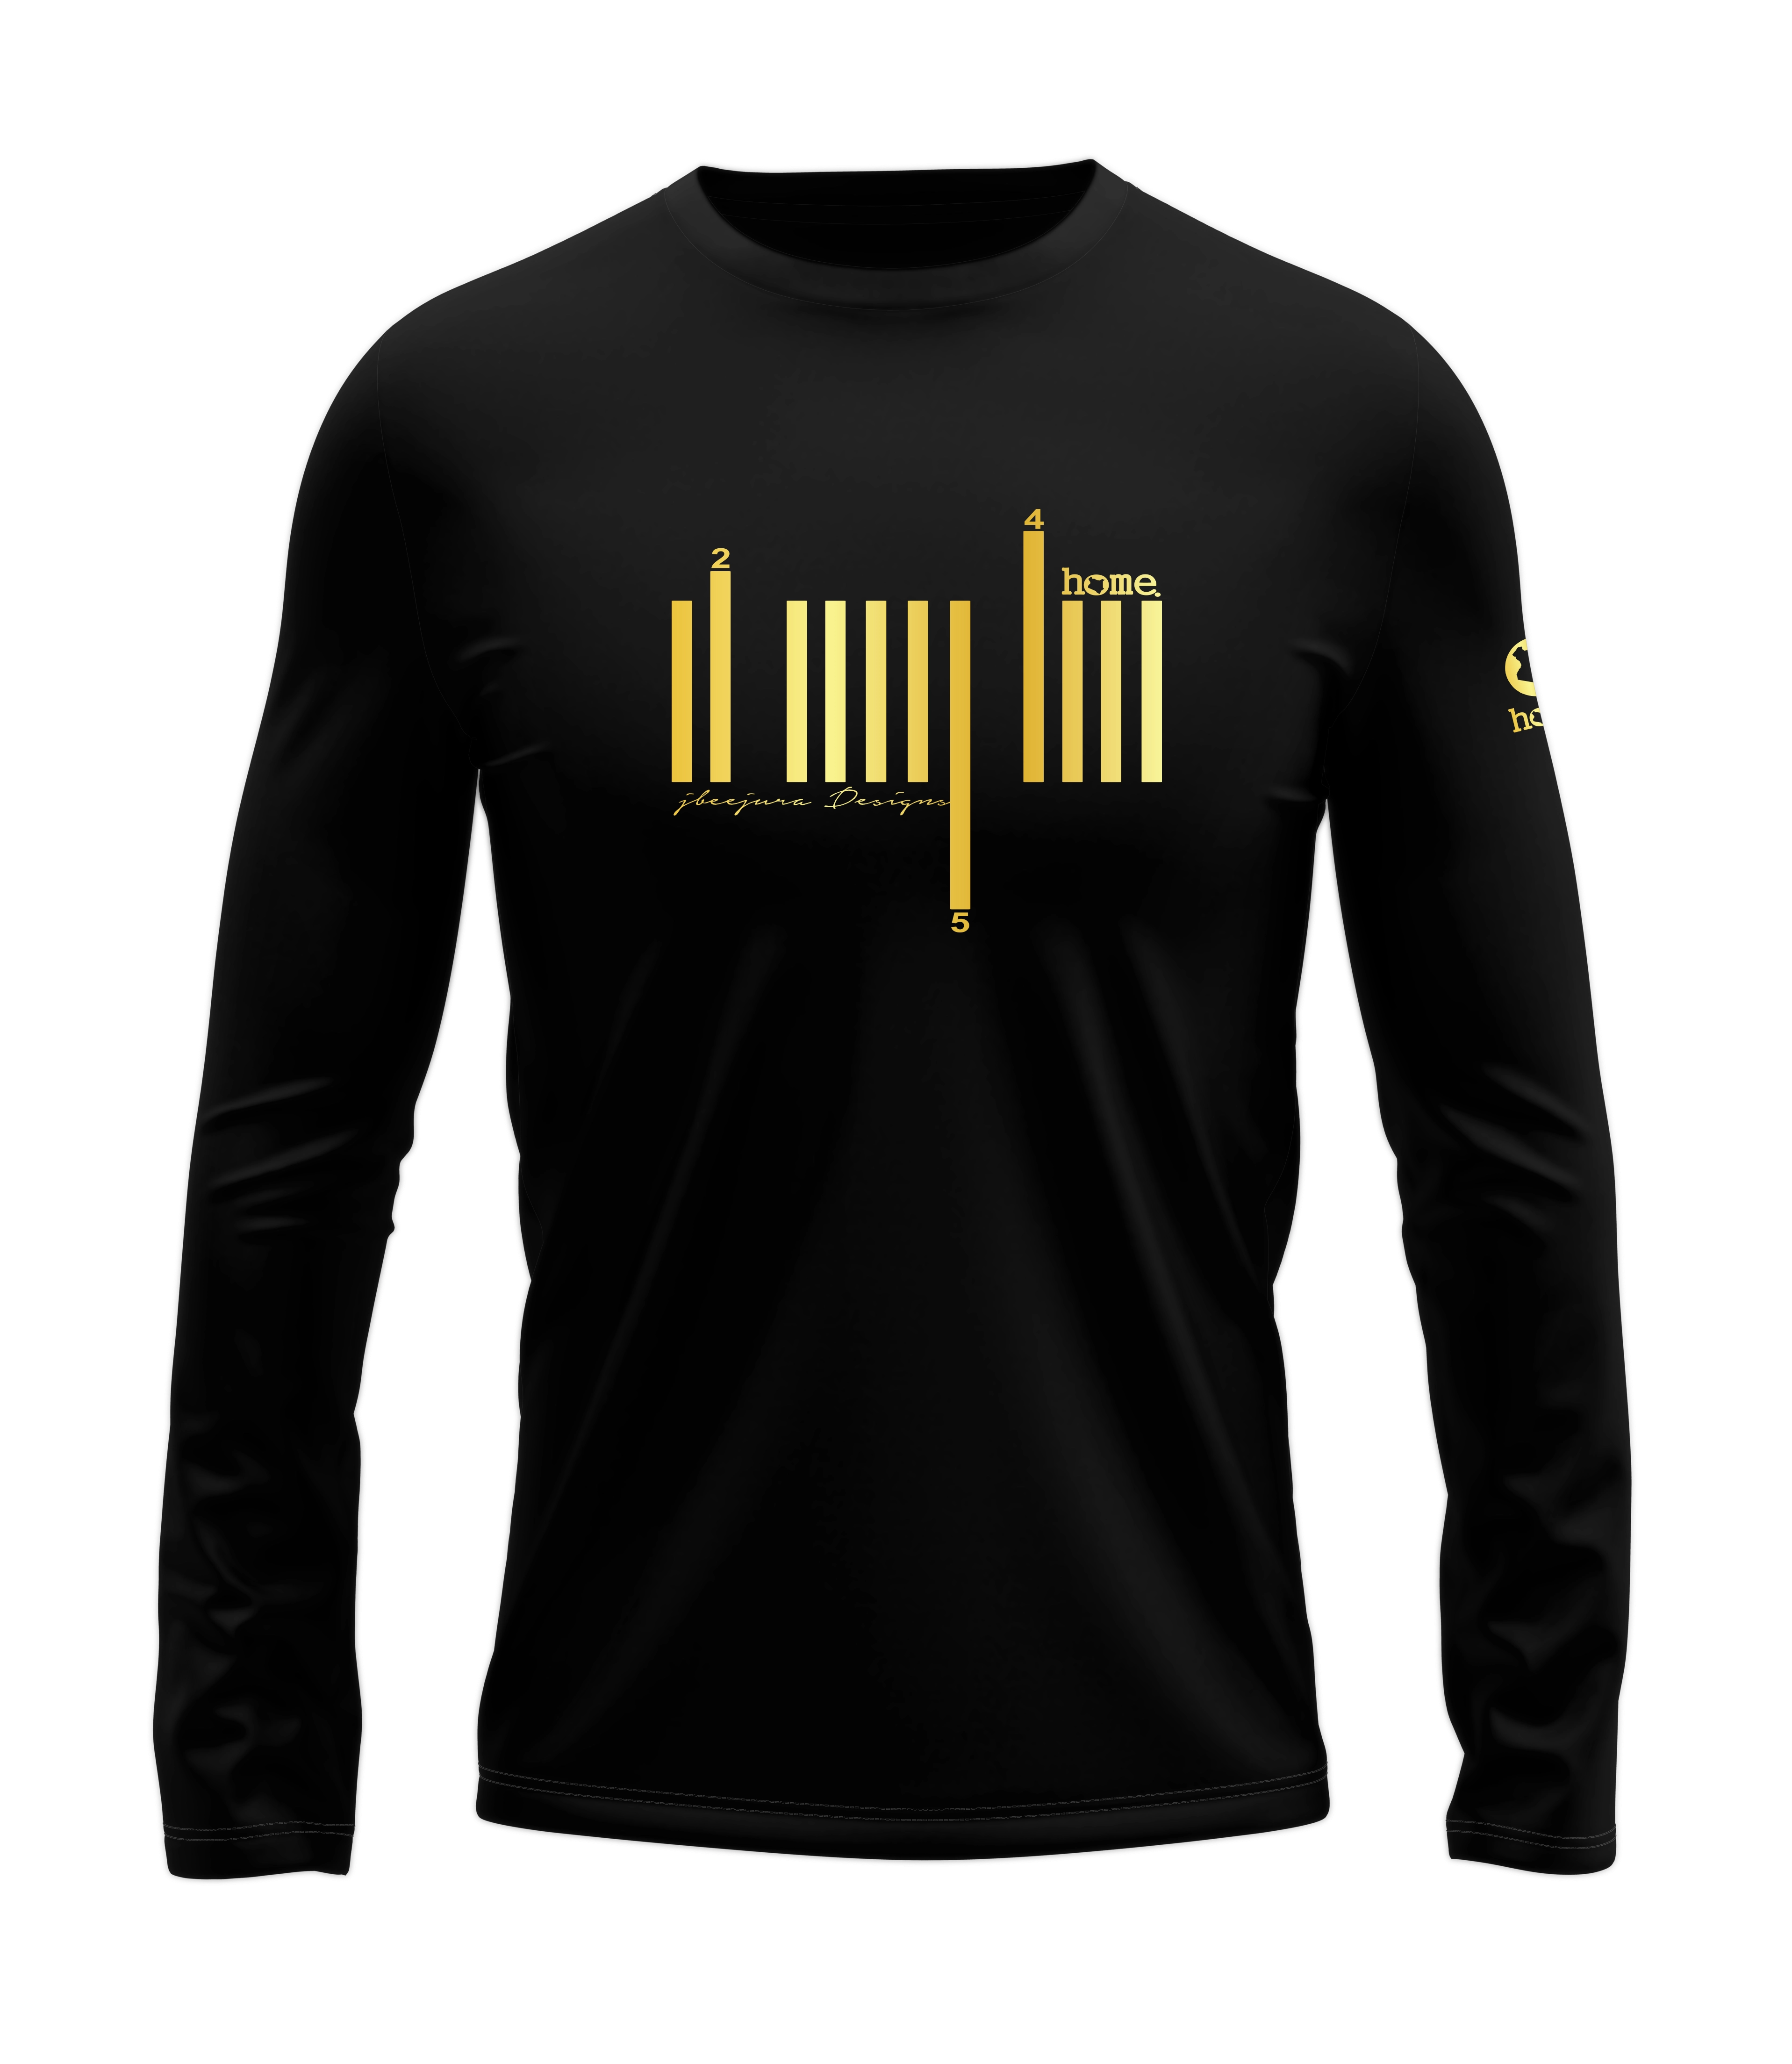 home_254 LONG-SLEEVED BLACK T-SHIRT WITH A GOLD BARS PRINT – COTTON PLUS FABRIC